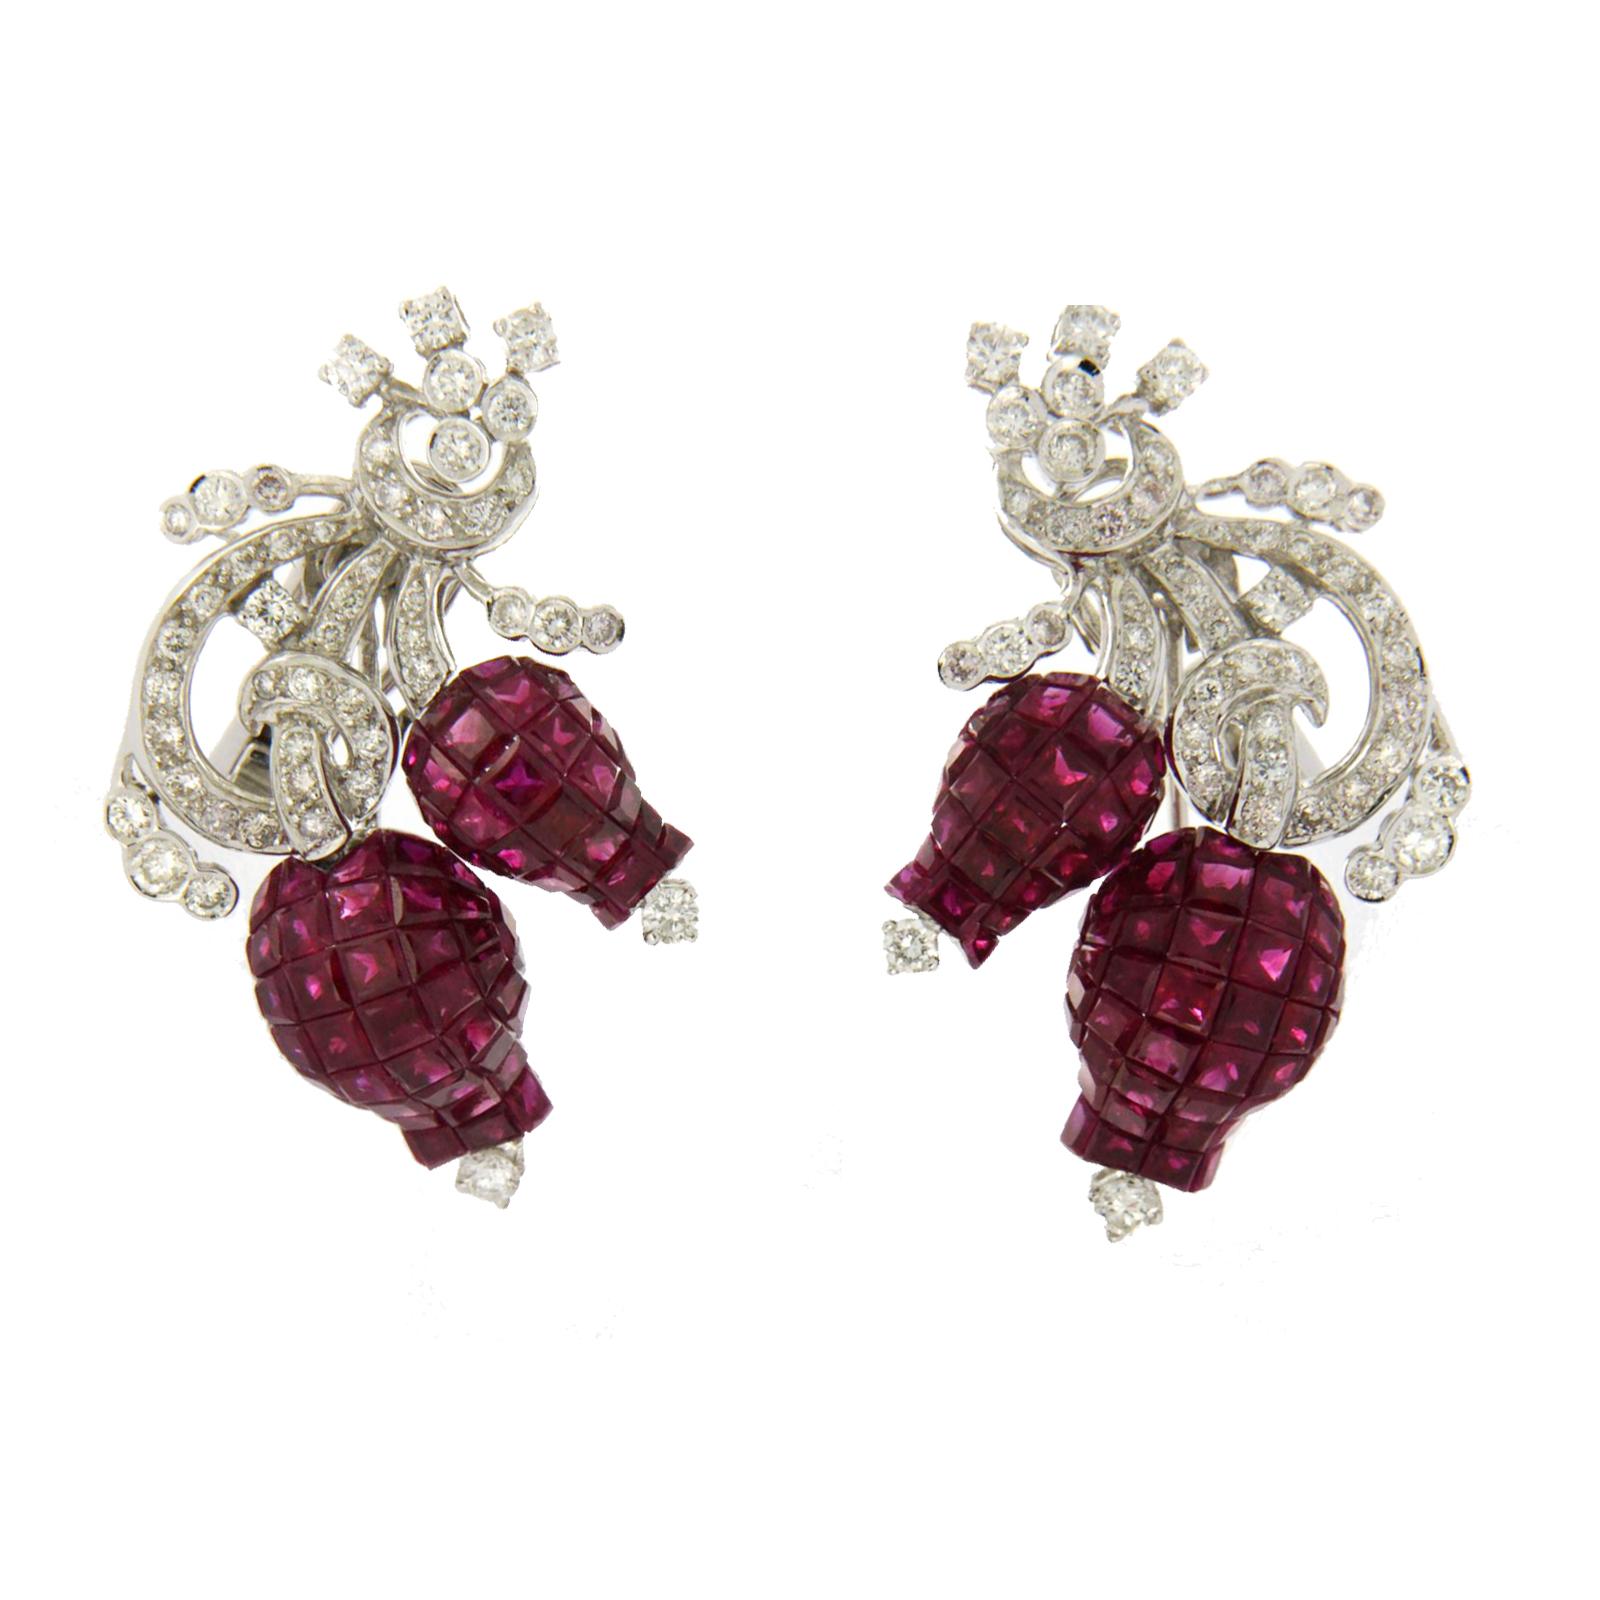 Women's 18 Kara Gold 1.99 Carat Diamonds and Invisible 25.22 Carat Ruby Tulip Earrings For Sale